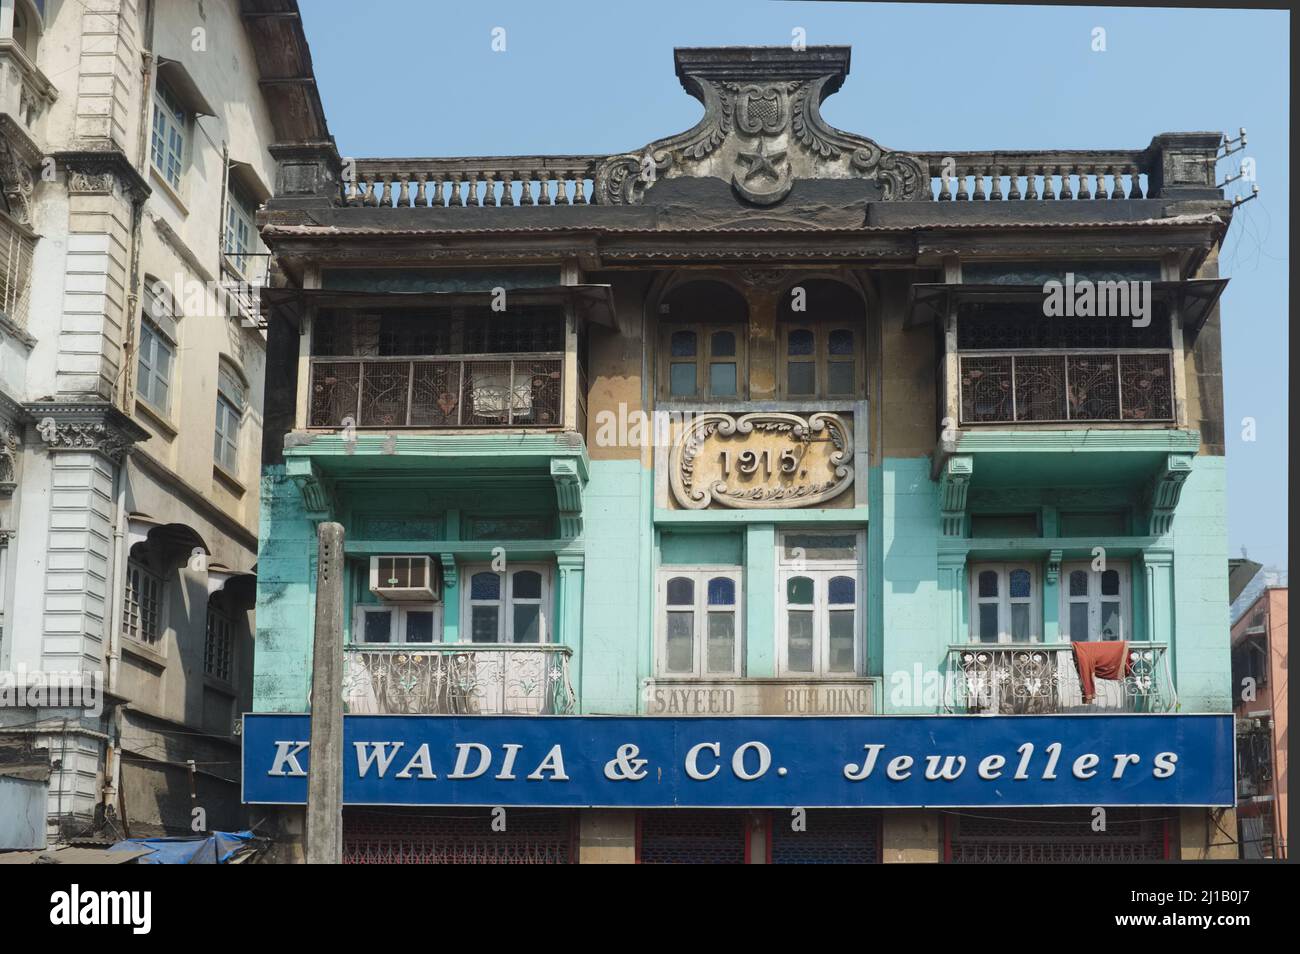 A ramshackle, dilapidated house built in 1915, housing amongst others K. Wadia & Co. Jewellers; Grant Road area, Mumbai, India Stock Photo